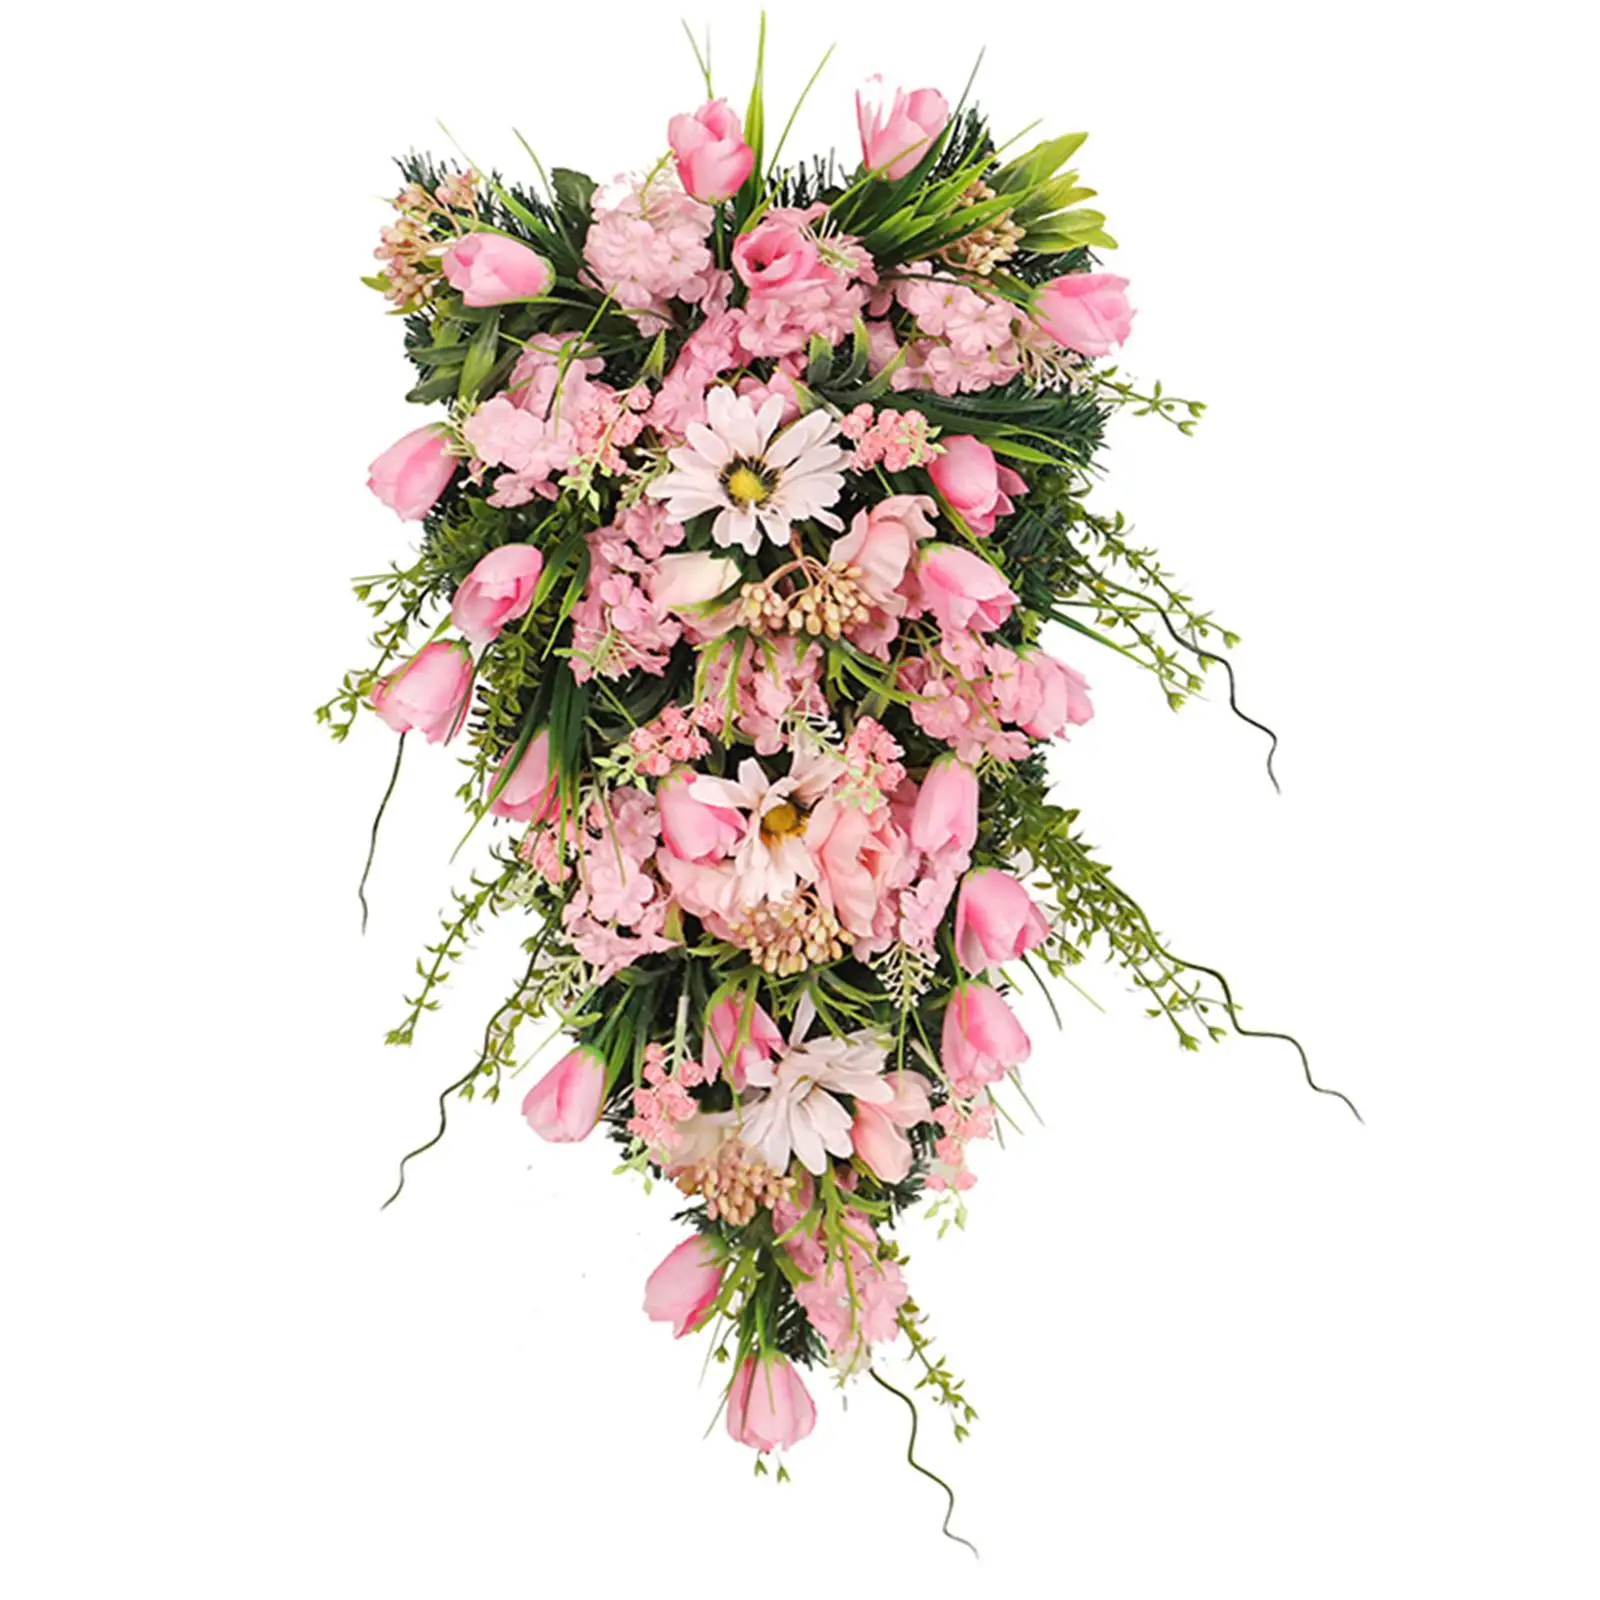 Floral Swag Spring Summer Teardrop Wreath Artificial Wreath Farmhouse Garland for Wedding Party Holiday Home Fireplace